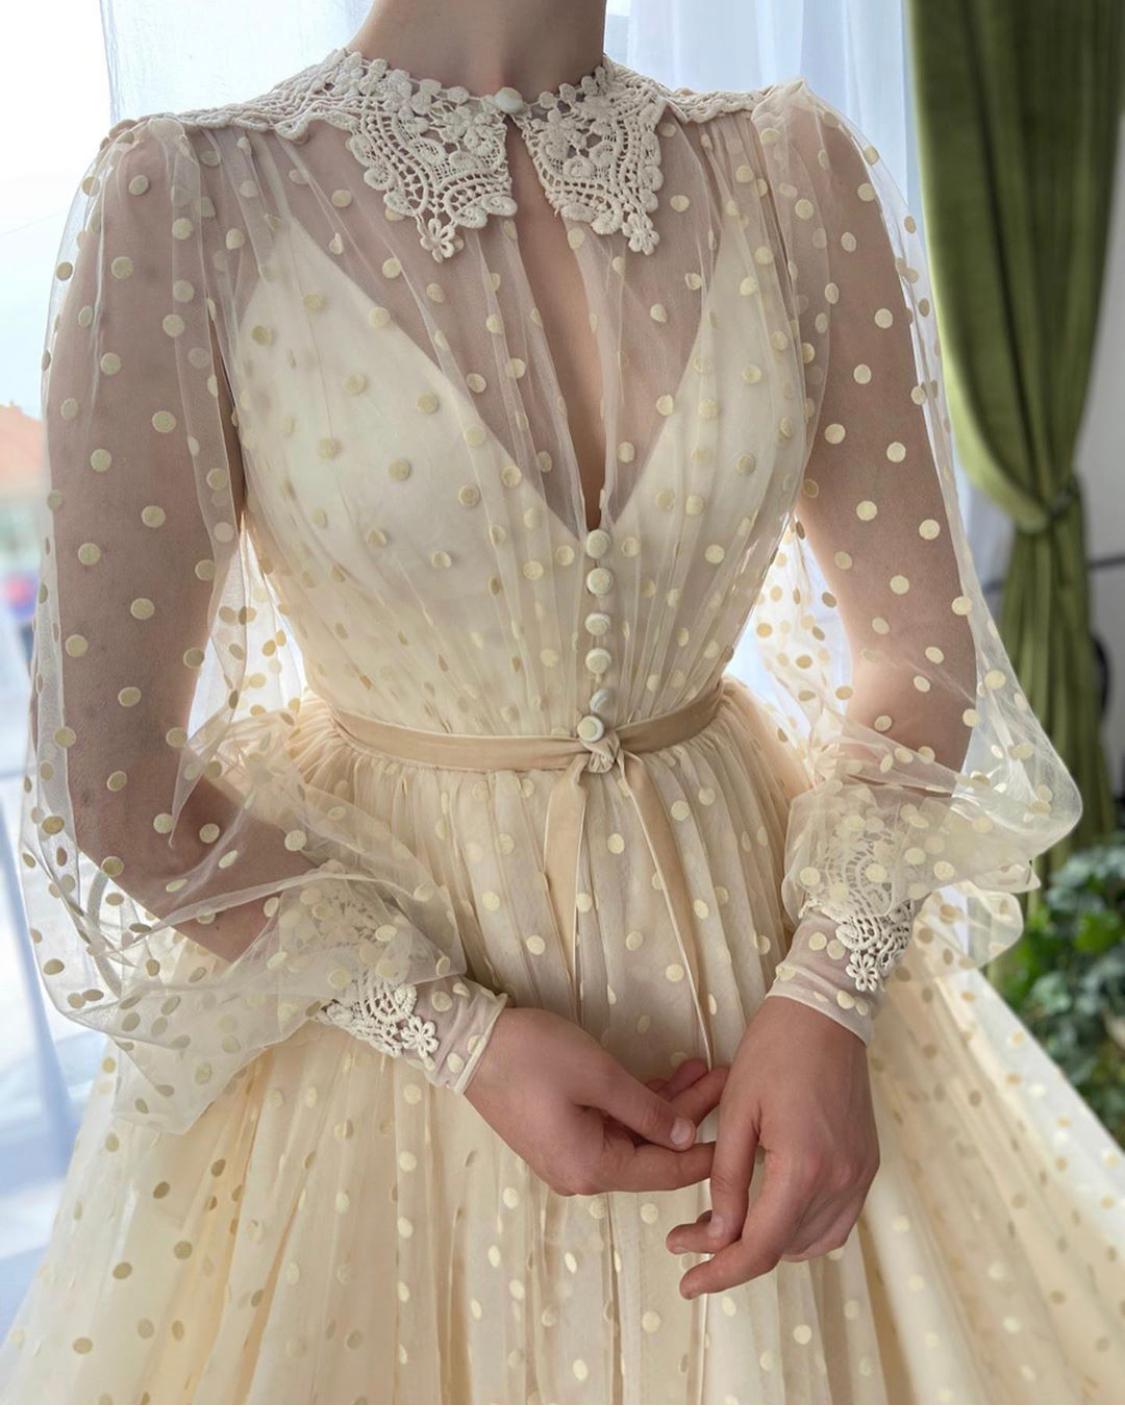 Beige A-Line dotted dress with embroidery and long sleeves